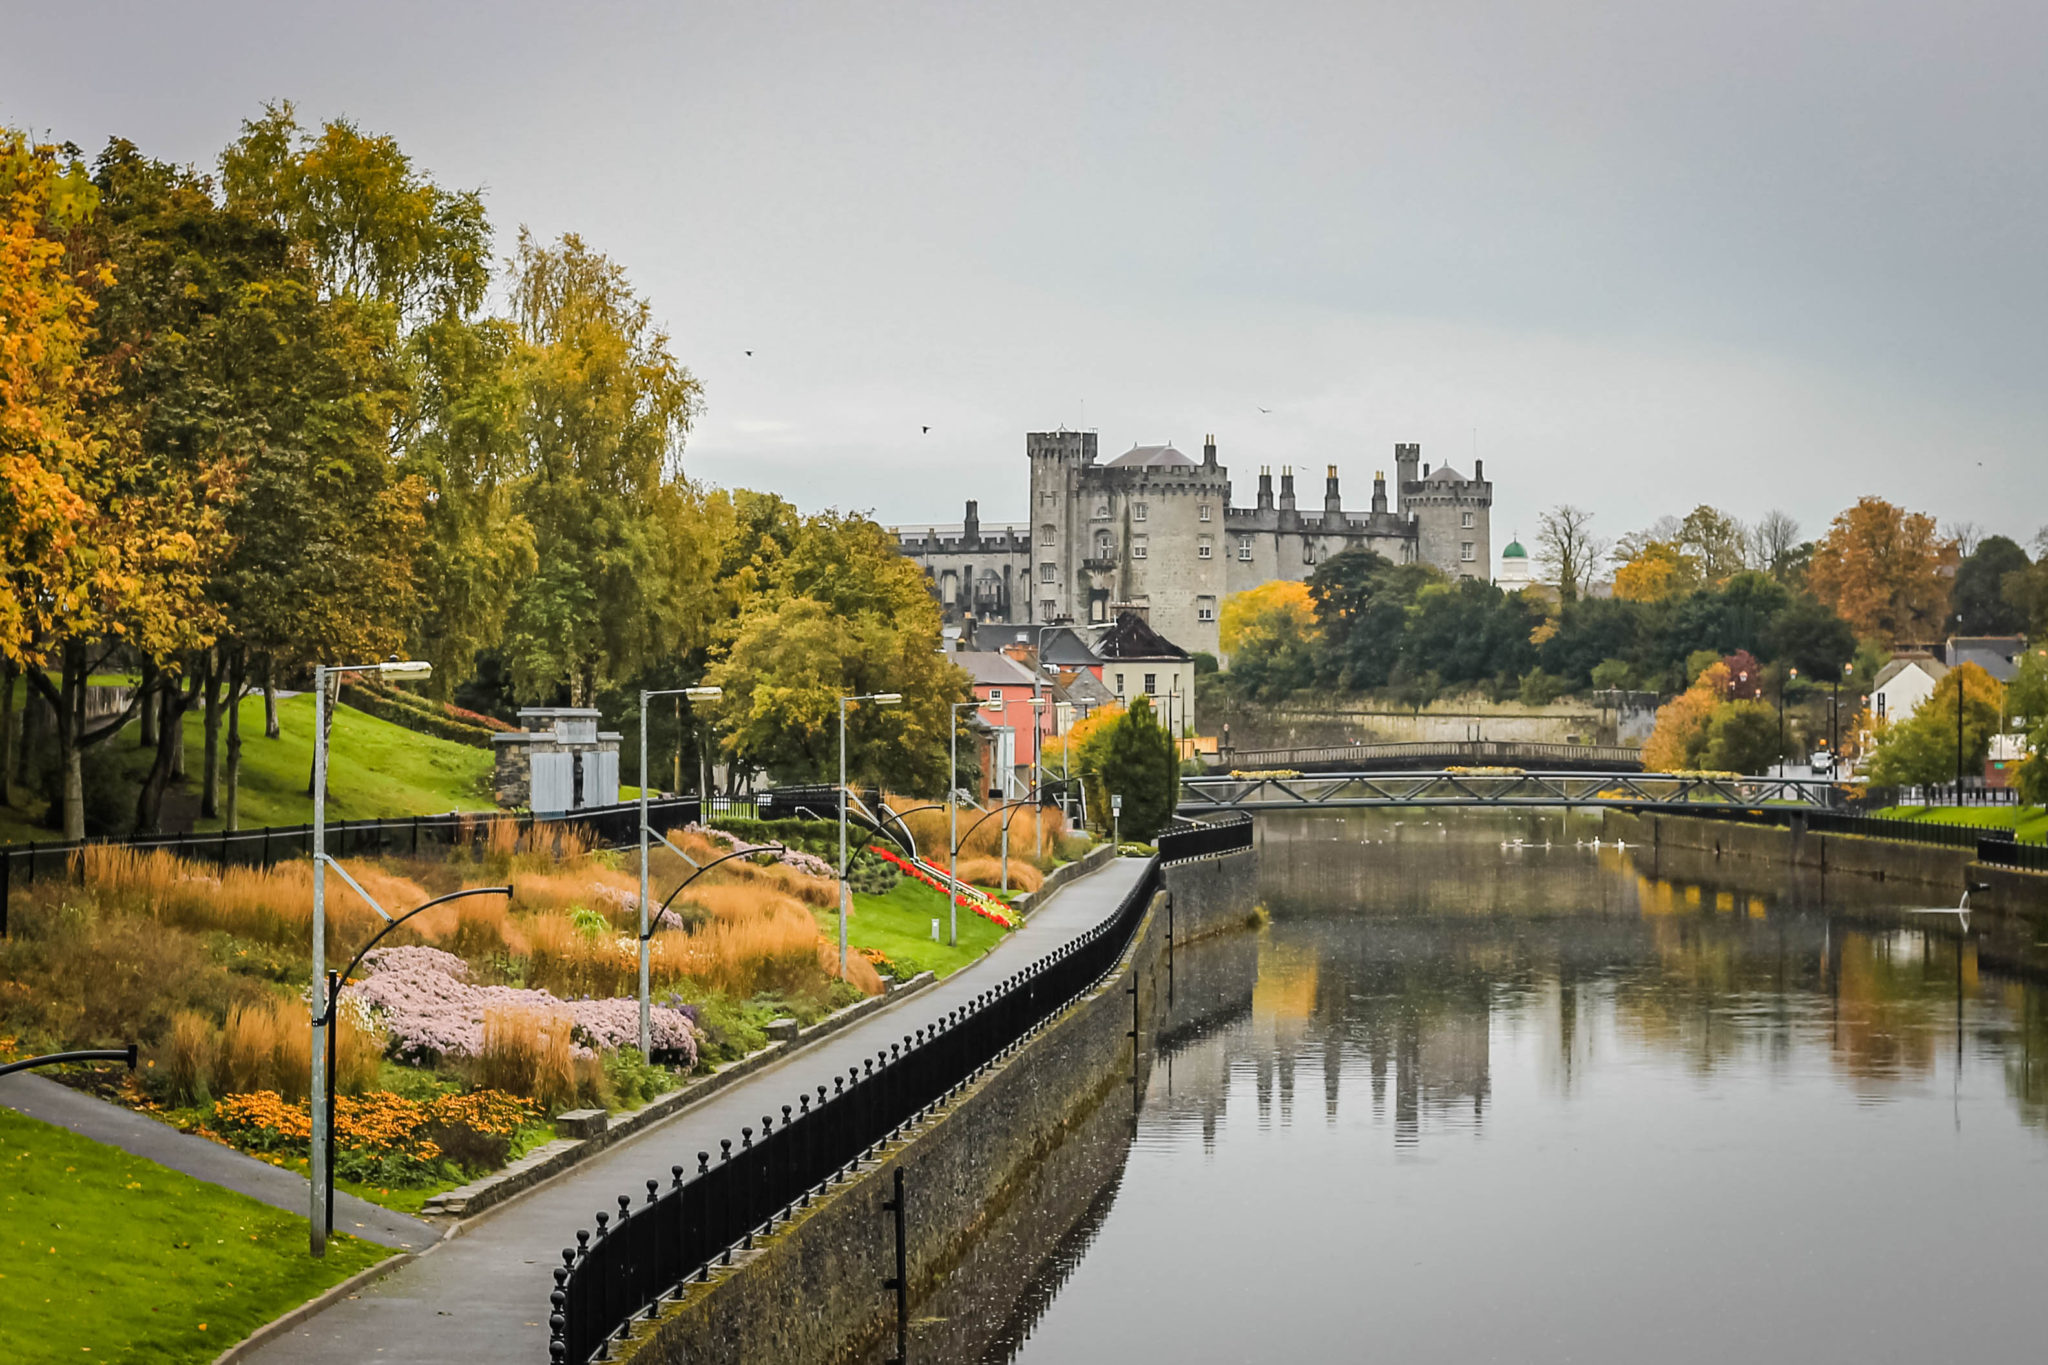 Kilkenny Ireland with the Nore River and Kilkenny Castle in the background during an autumn rain. Kilkenny is famous for the Medieval Mile and having a historic medieval city.